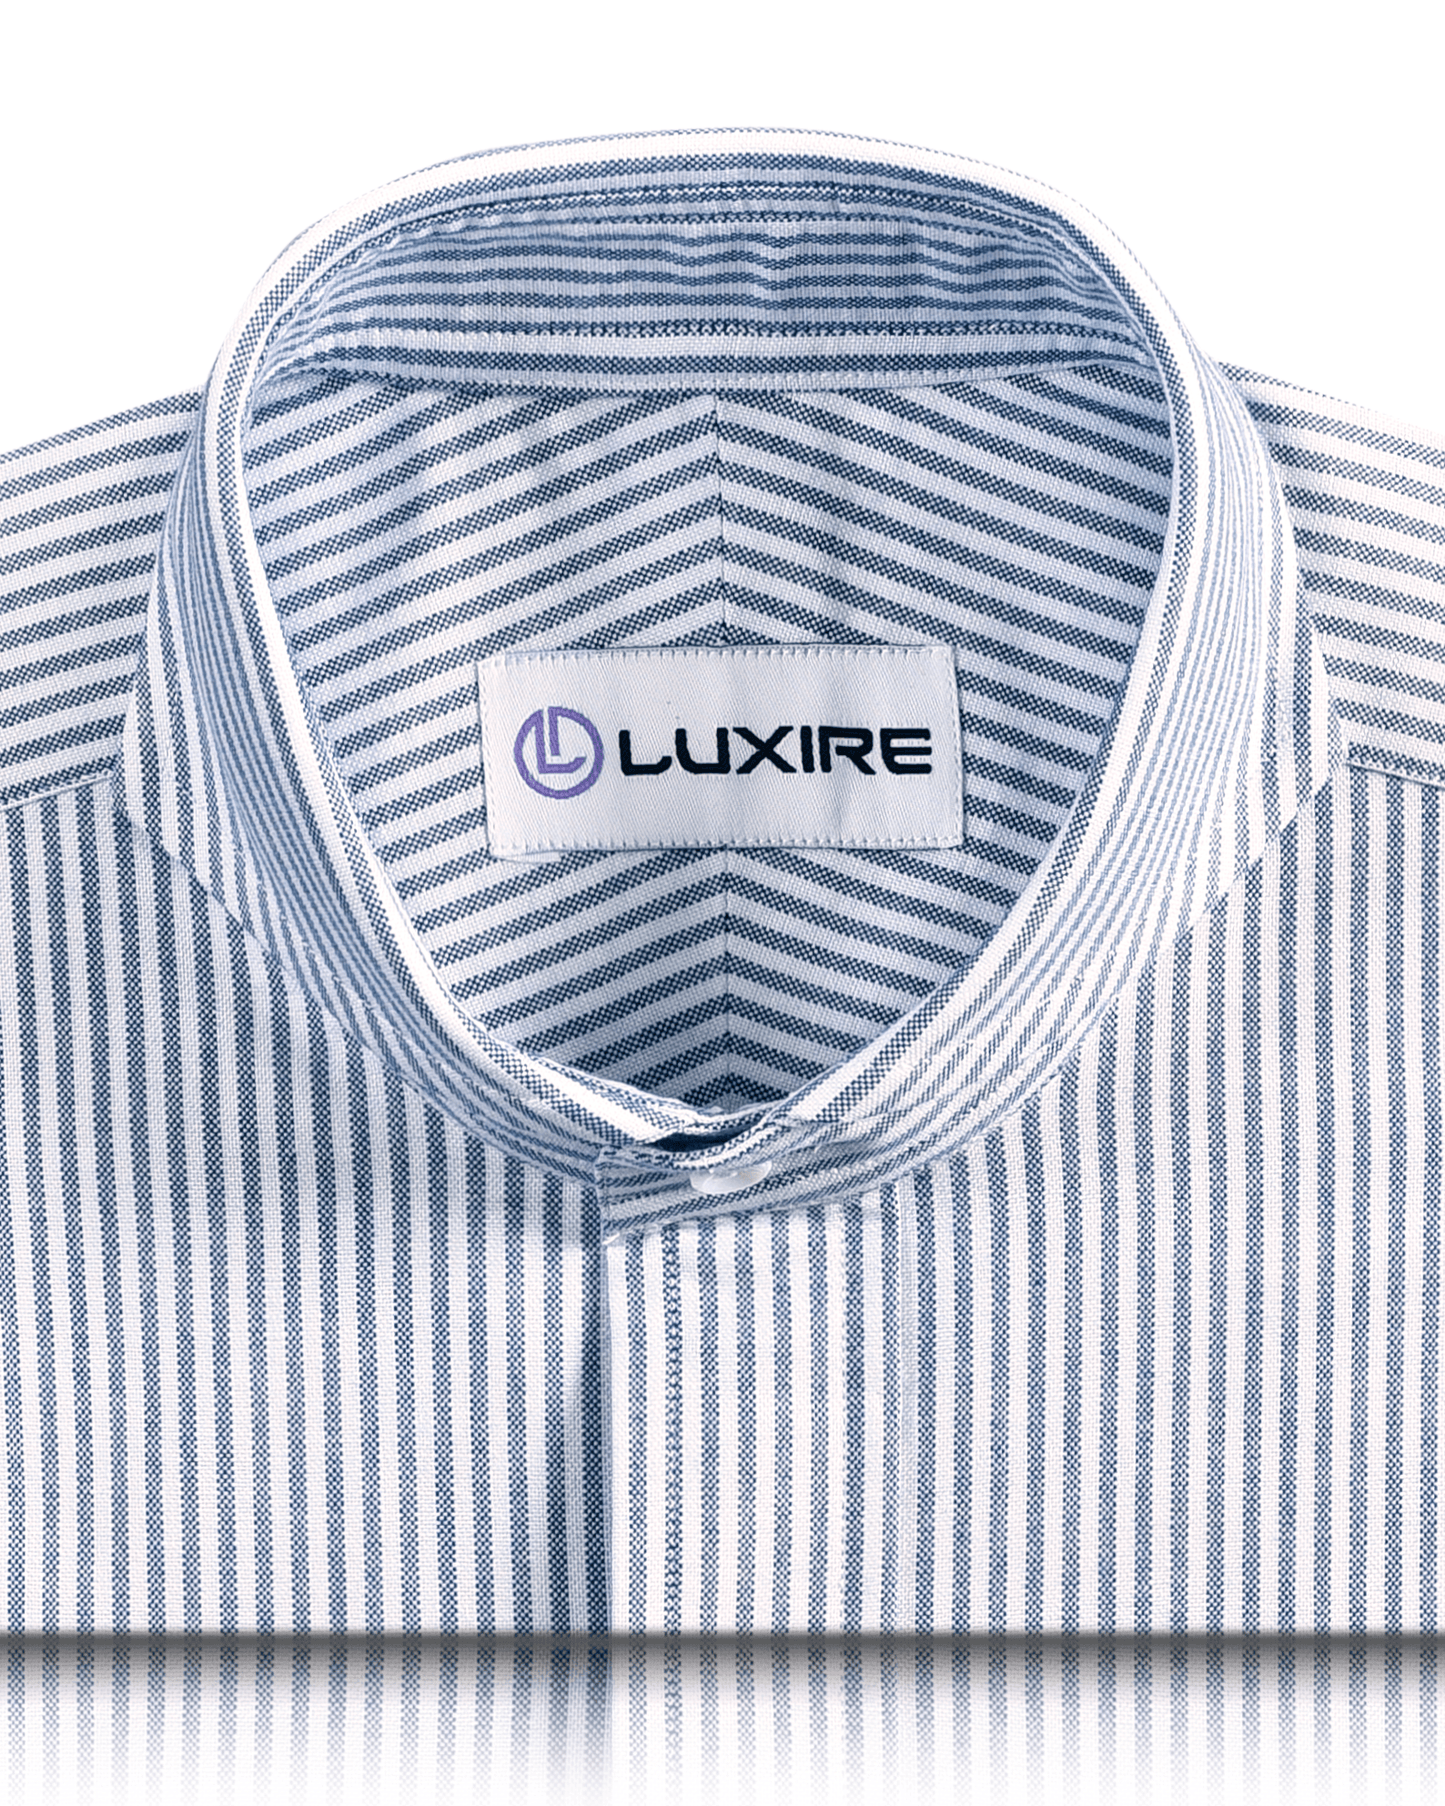 Collar of the custom oxford shirt for men by Luxire in white with blue university stripes